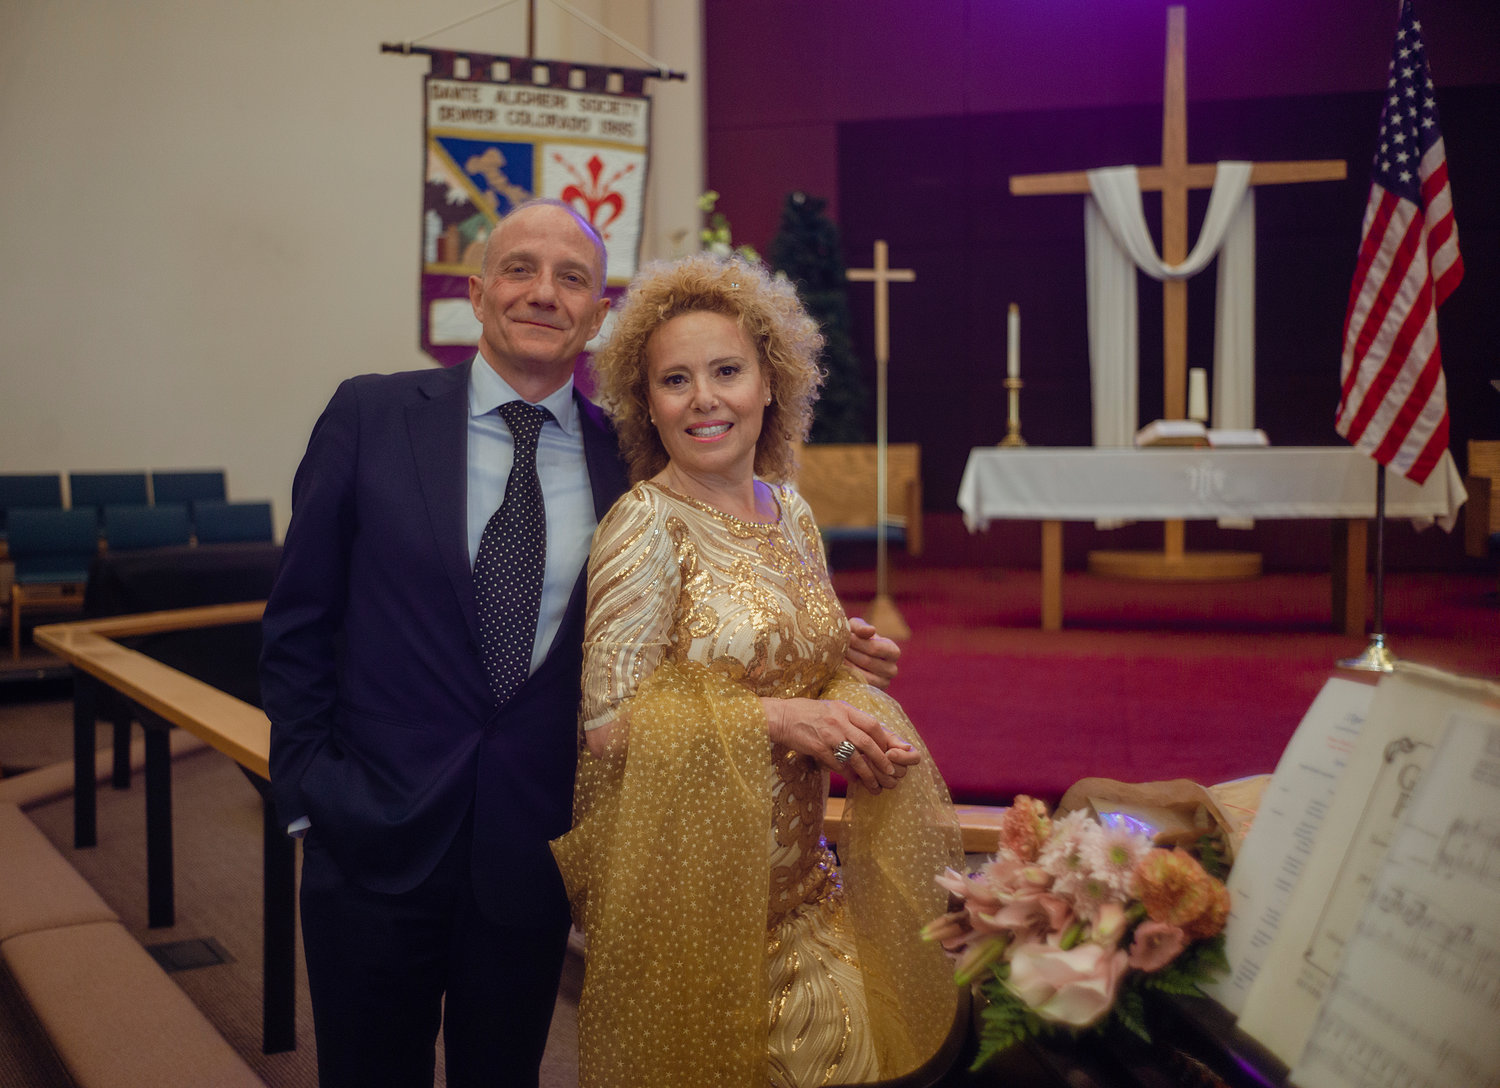 Soprano Angela Papale and accompanist Fabio Marra stand for a portrait after their May 15 performance at Green Mountain United Methodist Church in Lakewood.